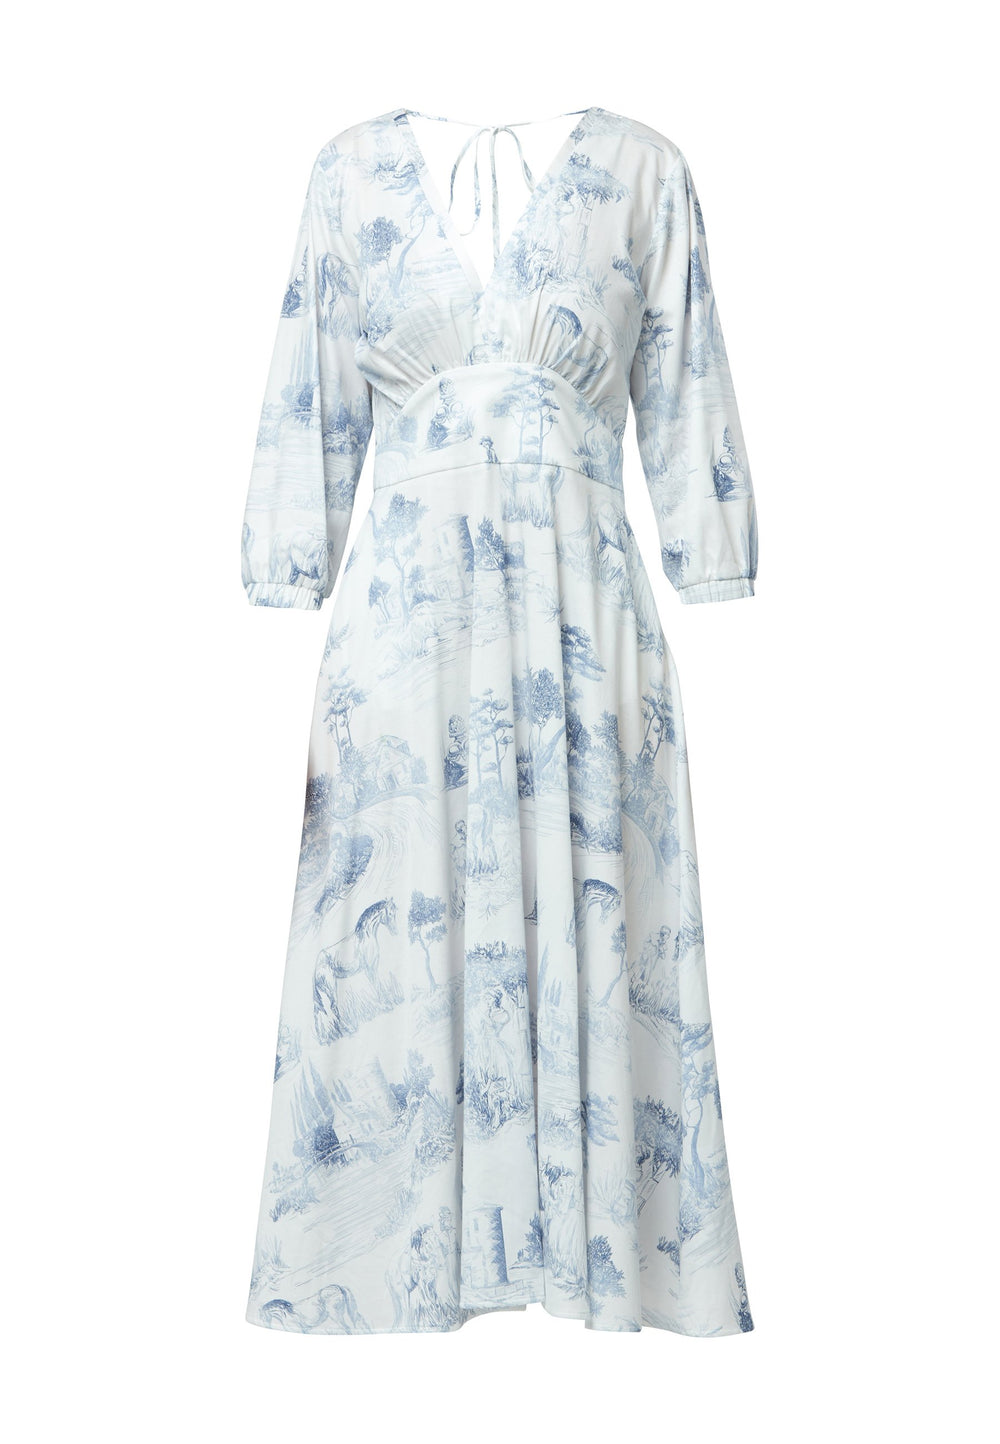 Inject some feminine style into your summer wardrobe with Bonnie. Cut from crisp cotton in a blue and white toile de Jouy print, this piece brings a timeless charm to your collection. The defined waist beautifully shapes the frame, while the V-neckline adds a touch of allure to the classic flared silhouett